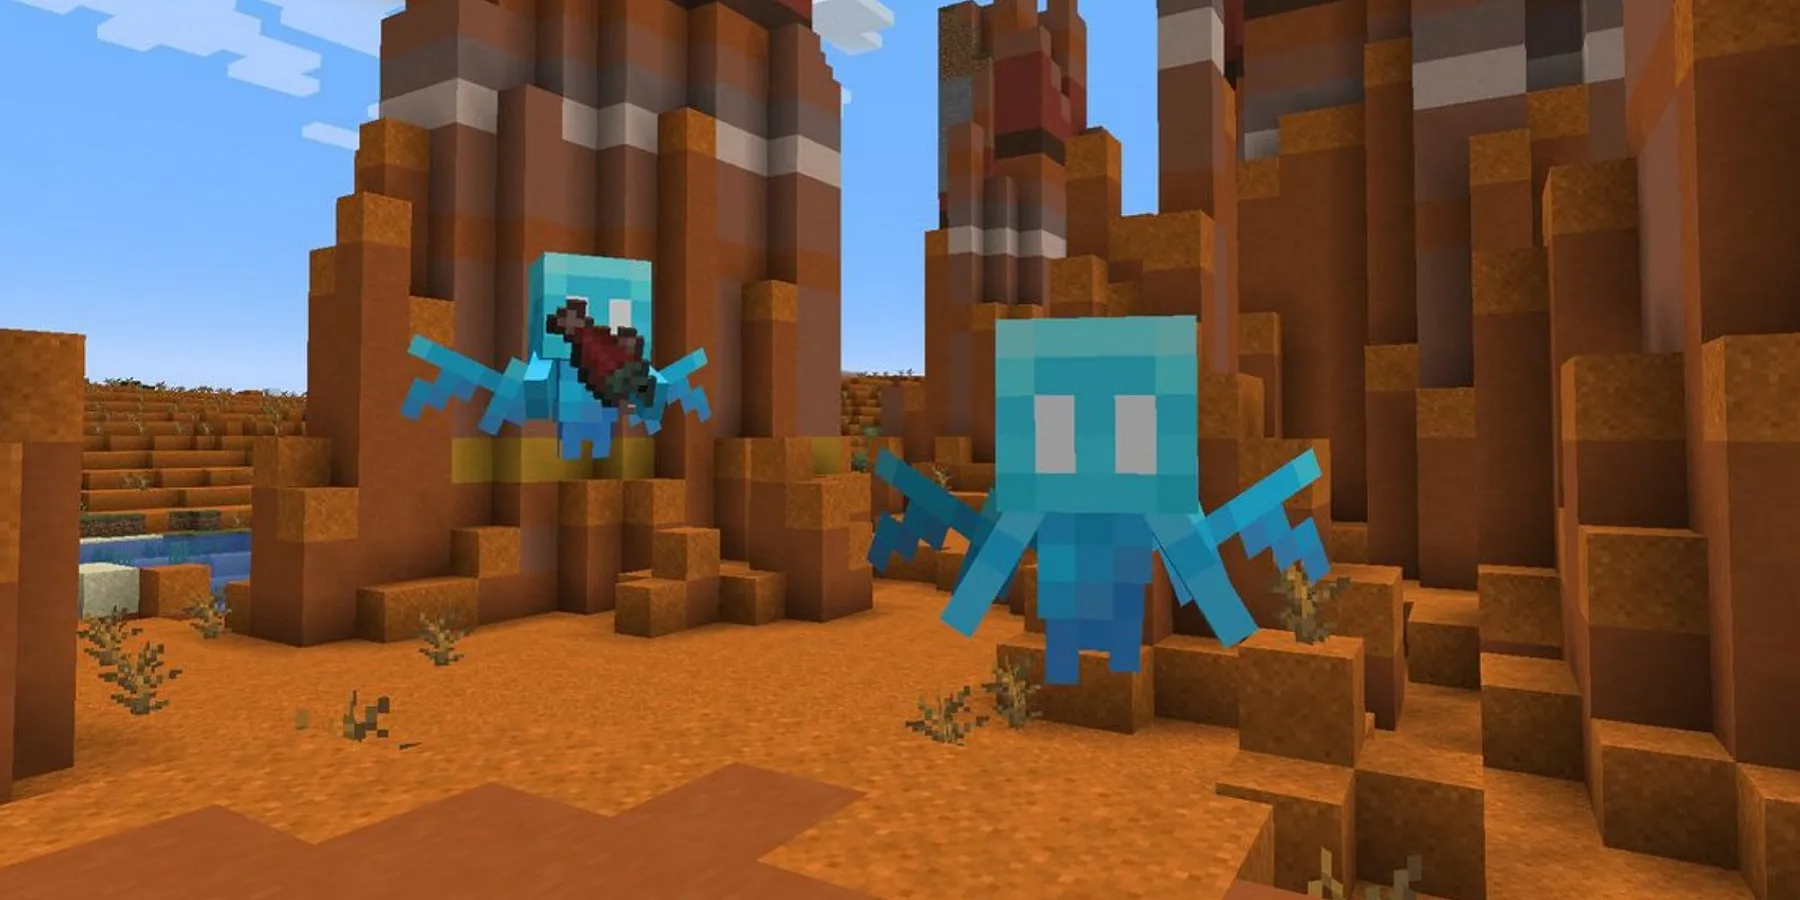 Image from Minecraft showing two Allays.